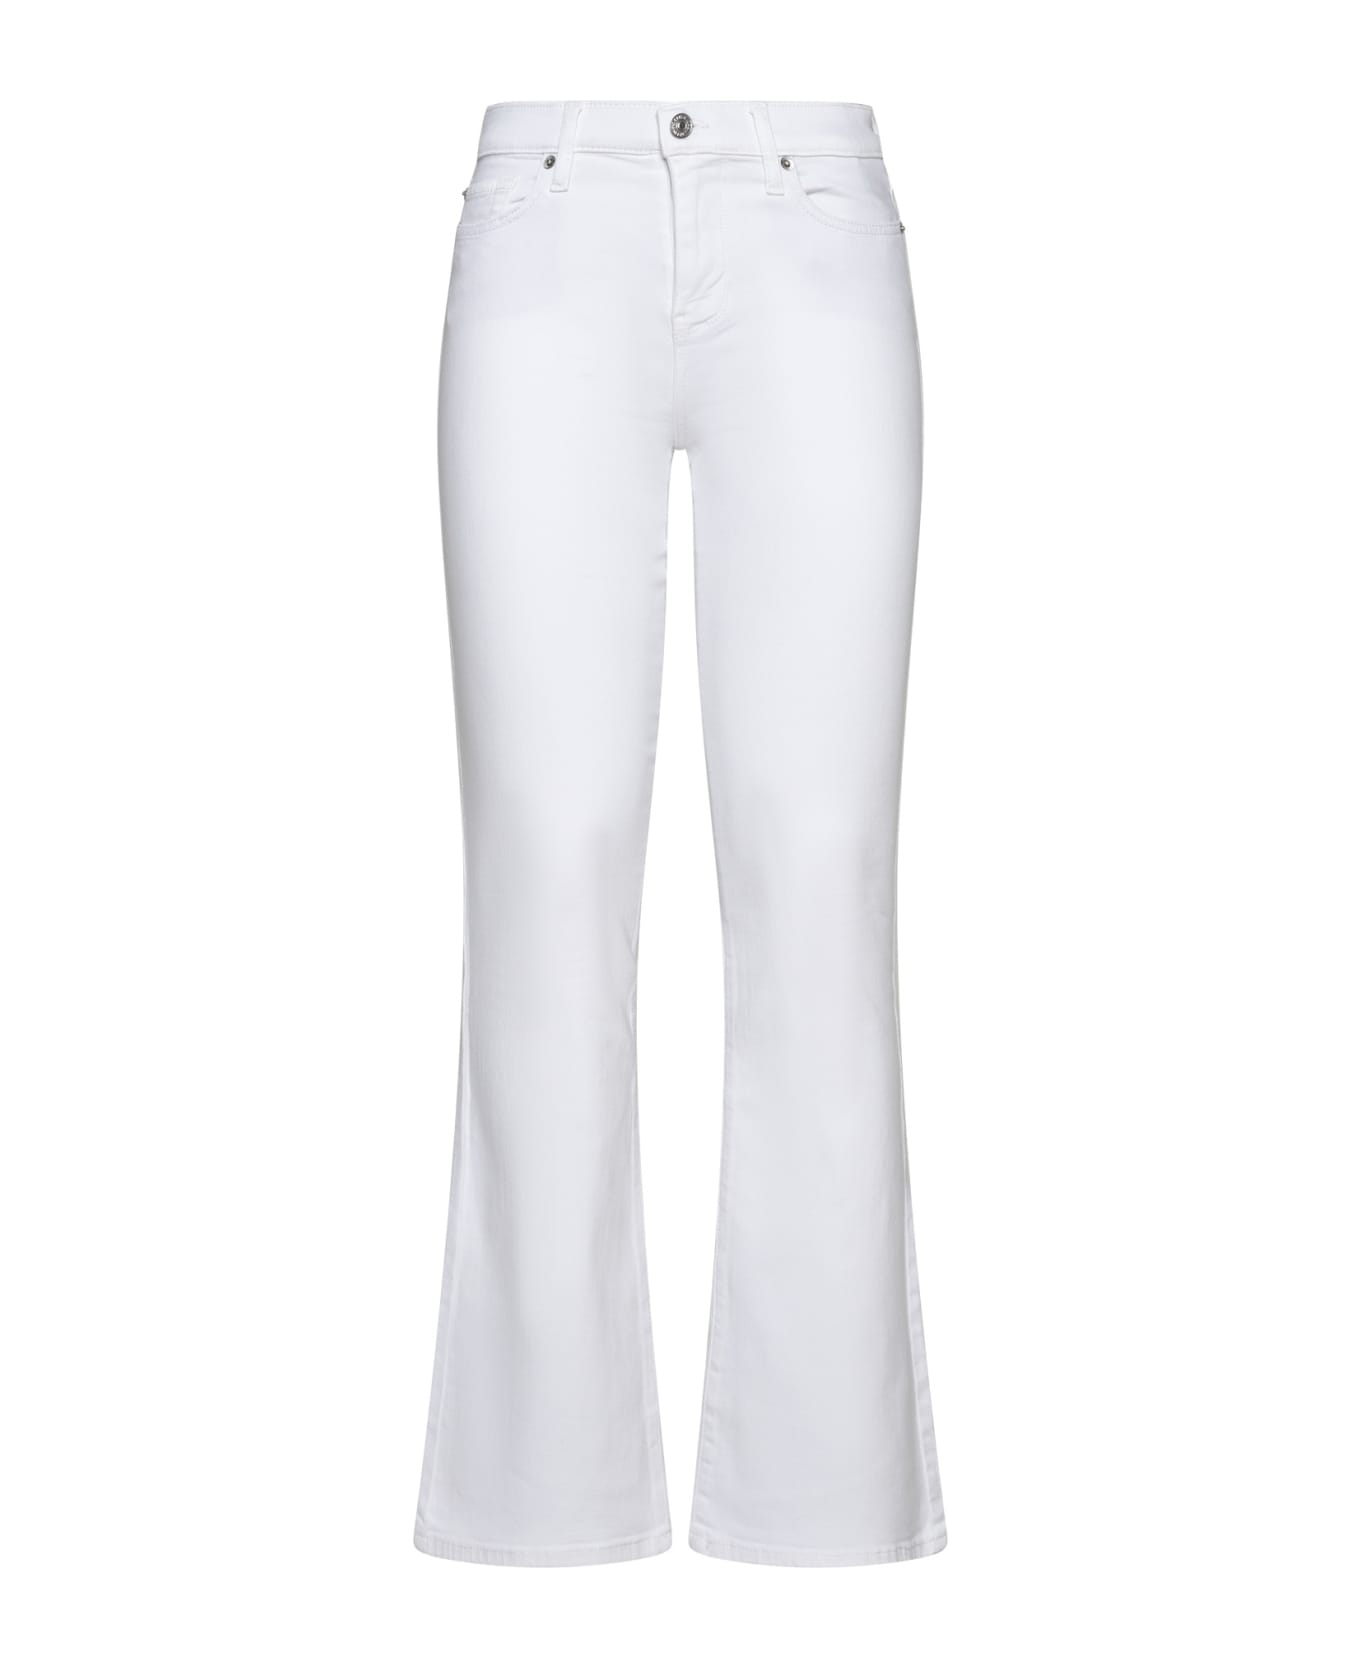 7 For All Mankind Jeans - White